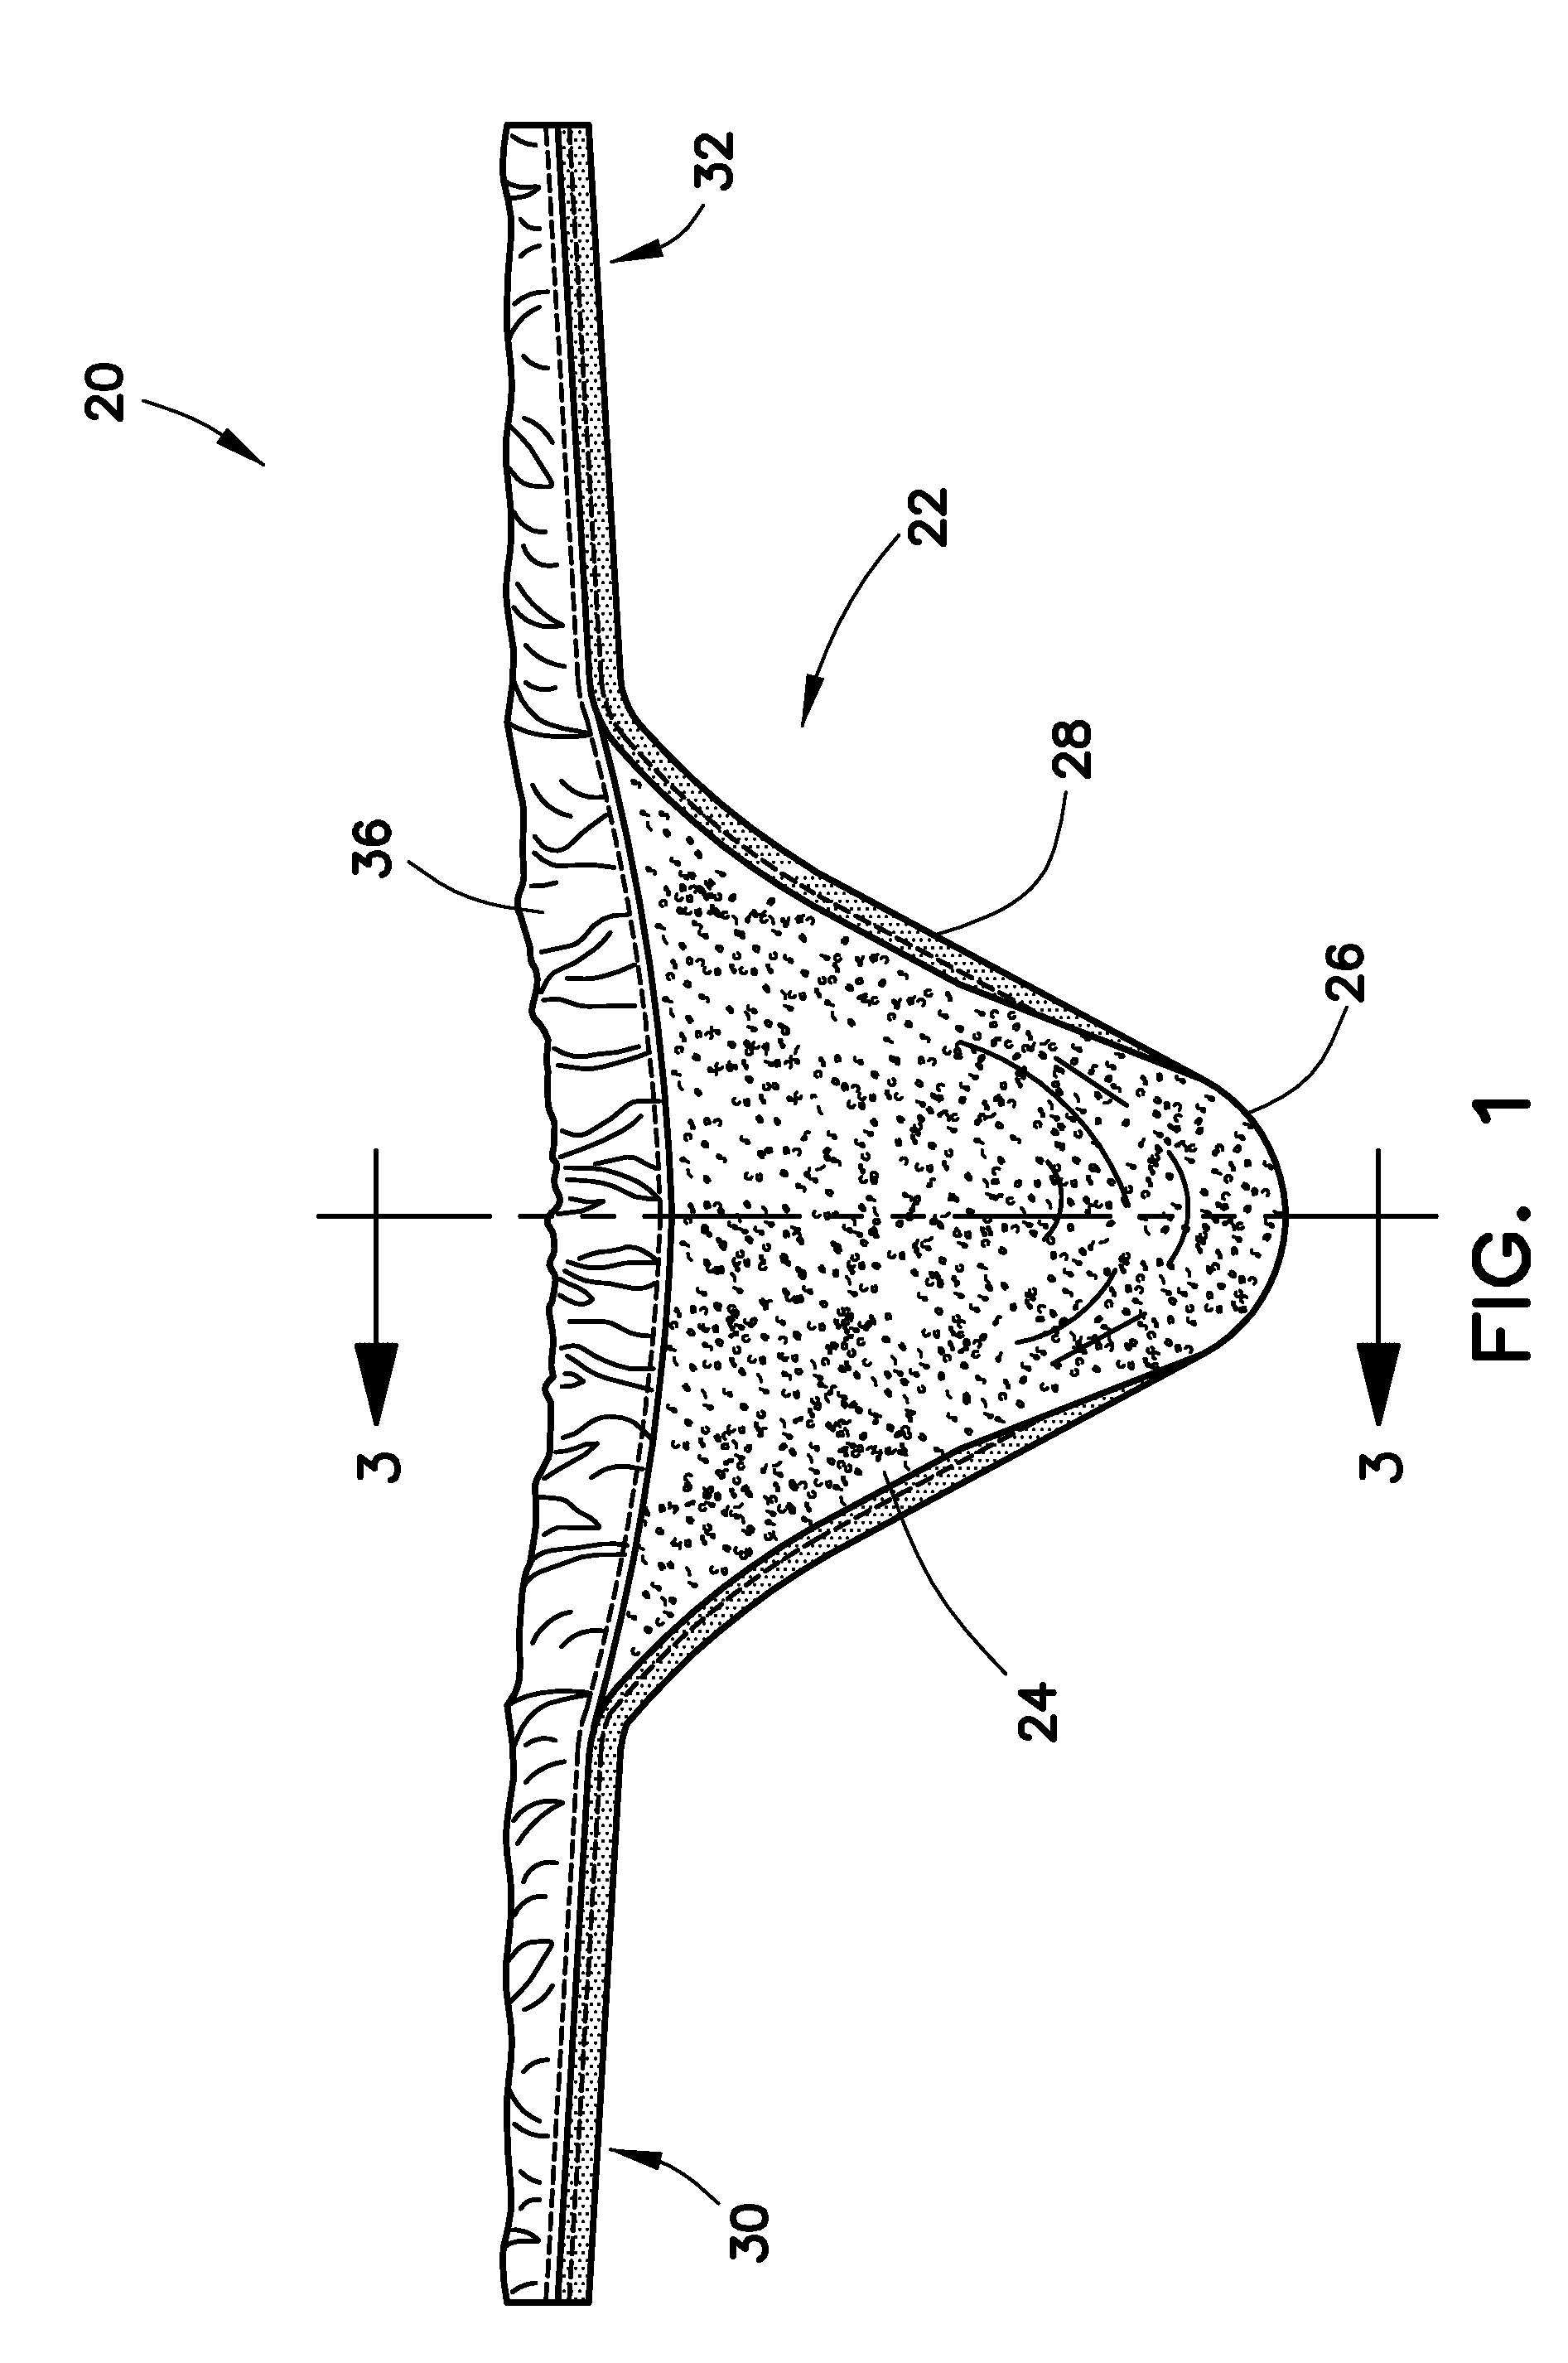 Eco-friendly urine guard for shielding and/or receiving discharging urine from an infant